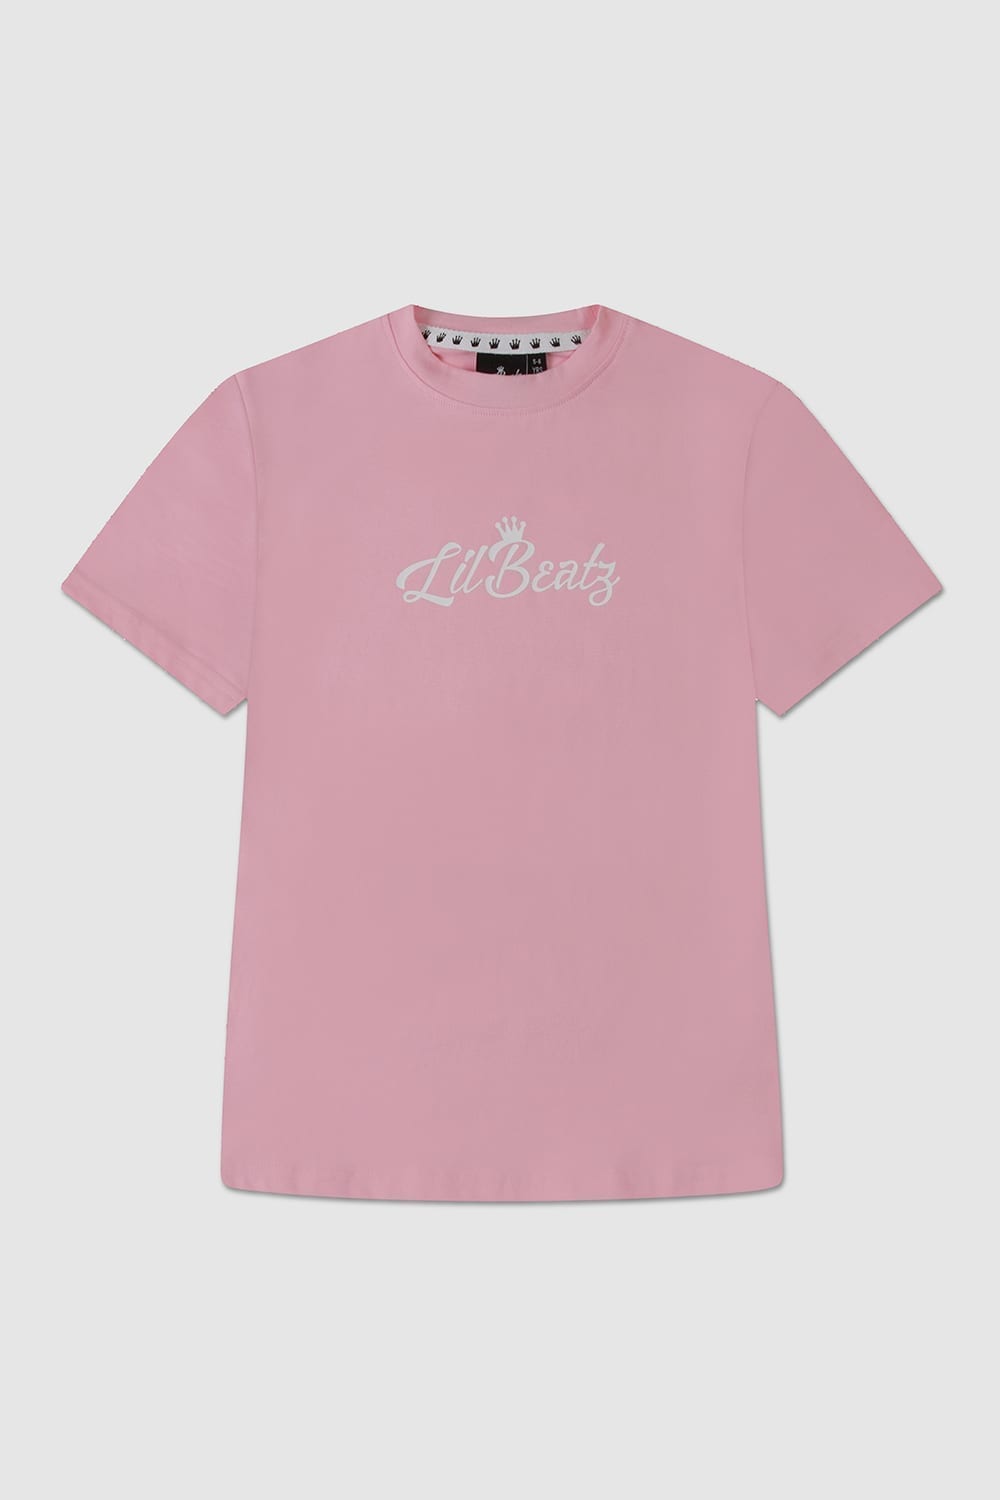 Classic Pink Tshirt Front